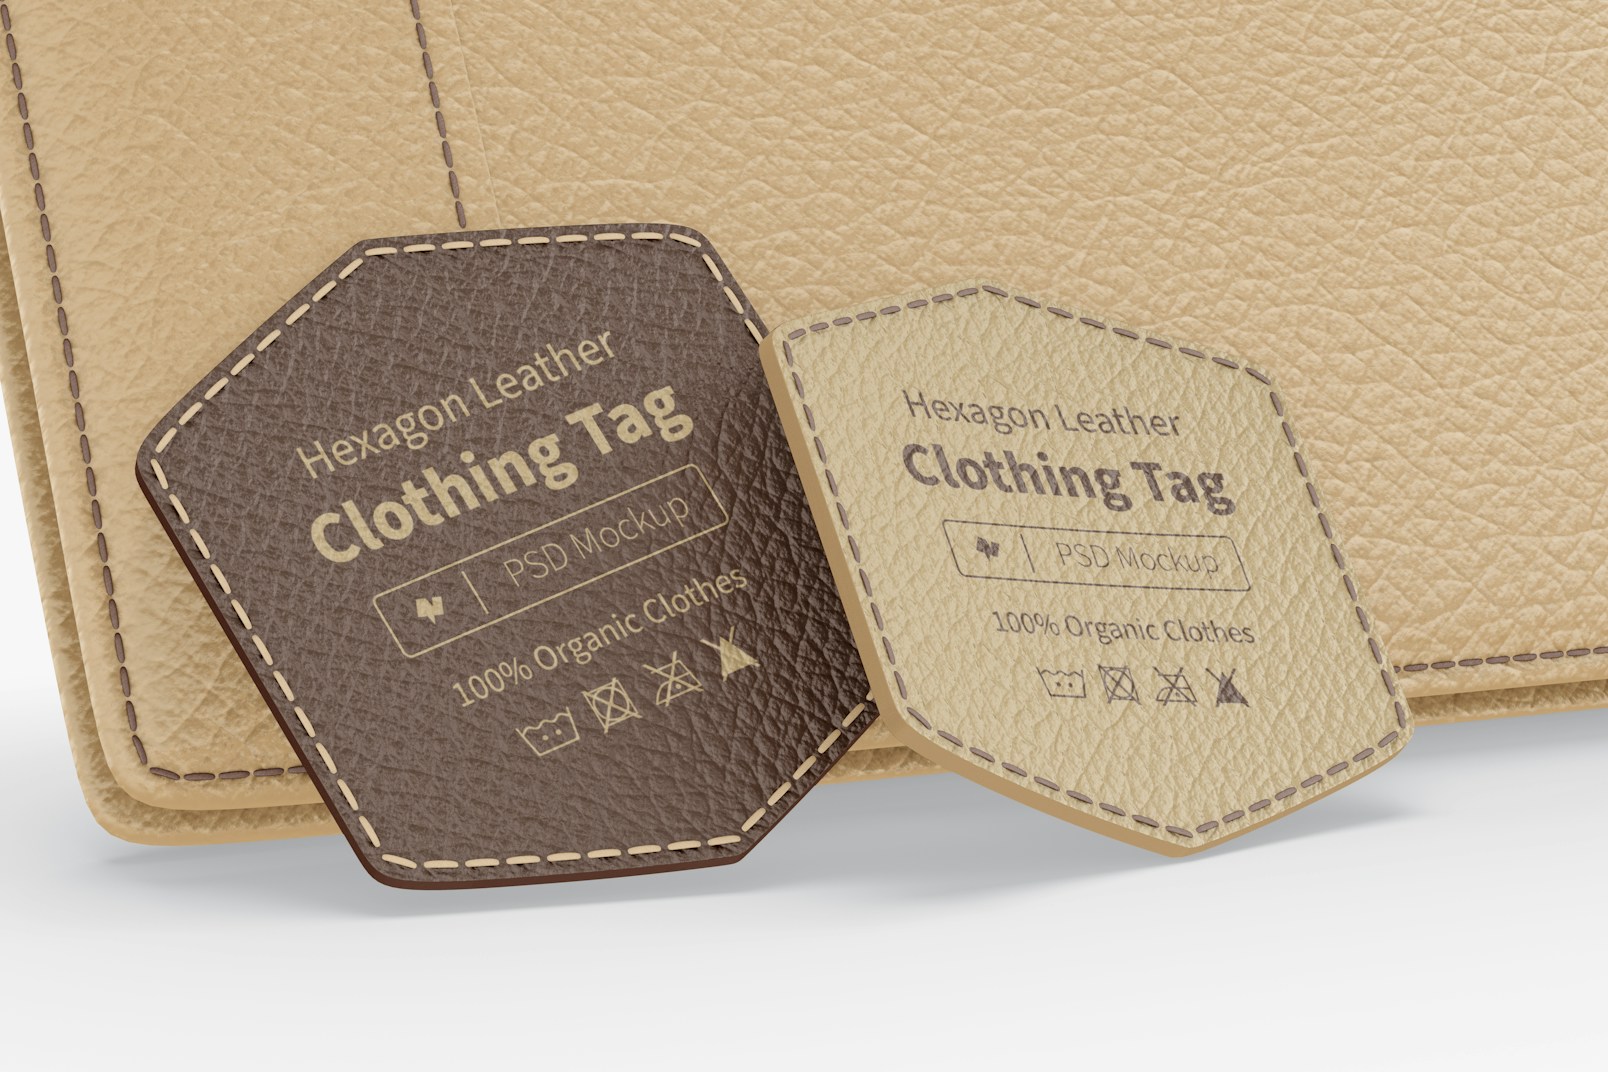 Hexagon Leather Clothing Tags Mockup, Leaned